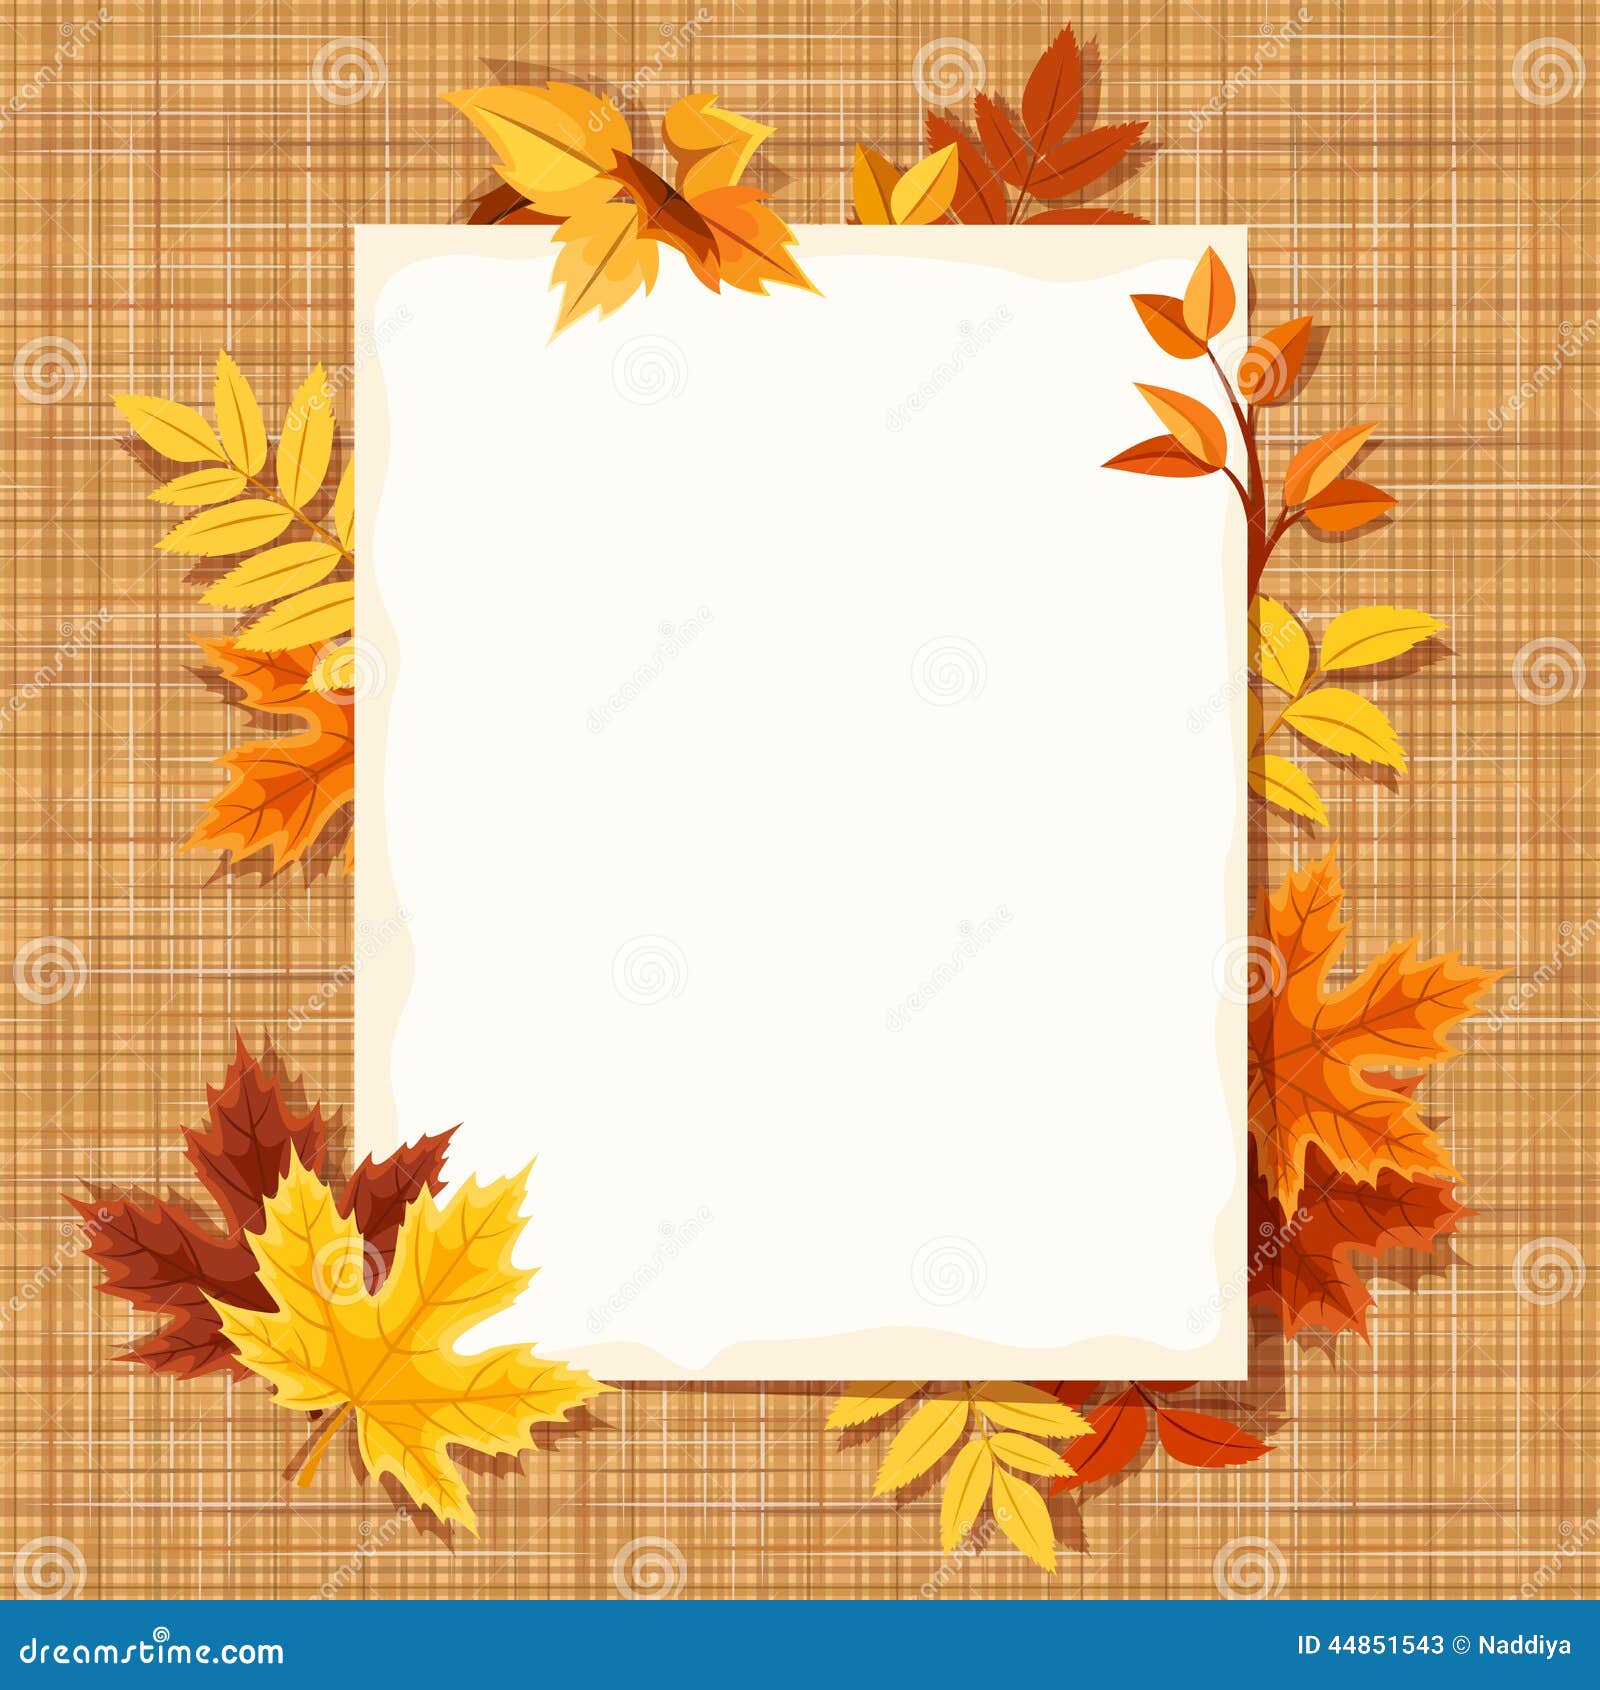 Autumn Leaves And A Paper Sheet On A Sacking Fabric. Vector Eps-10. Stock Vector ...1300 x 1390